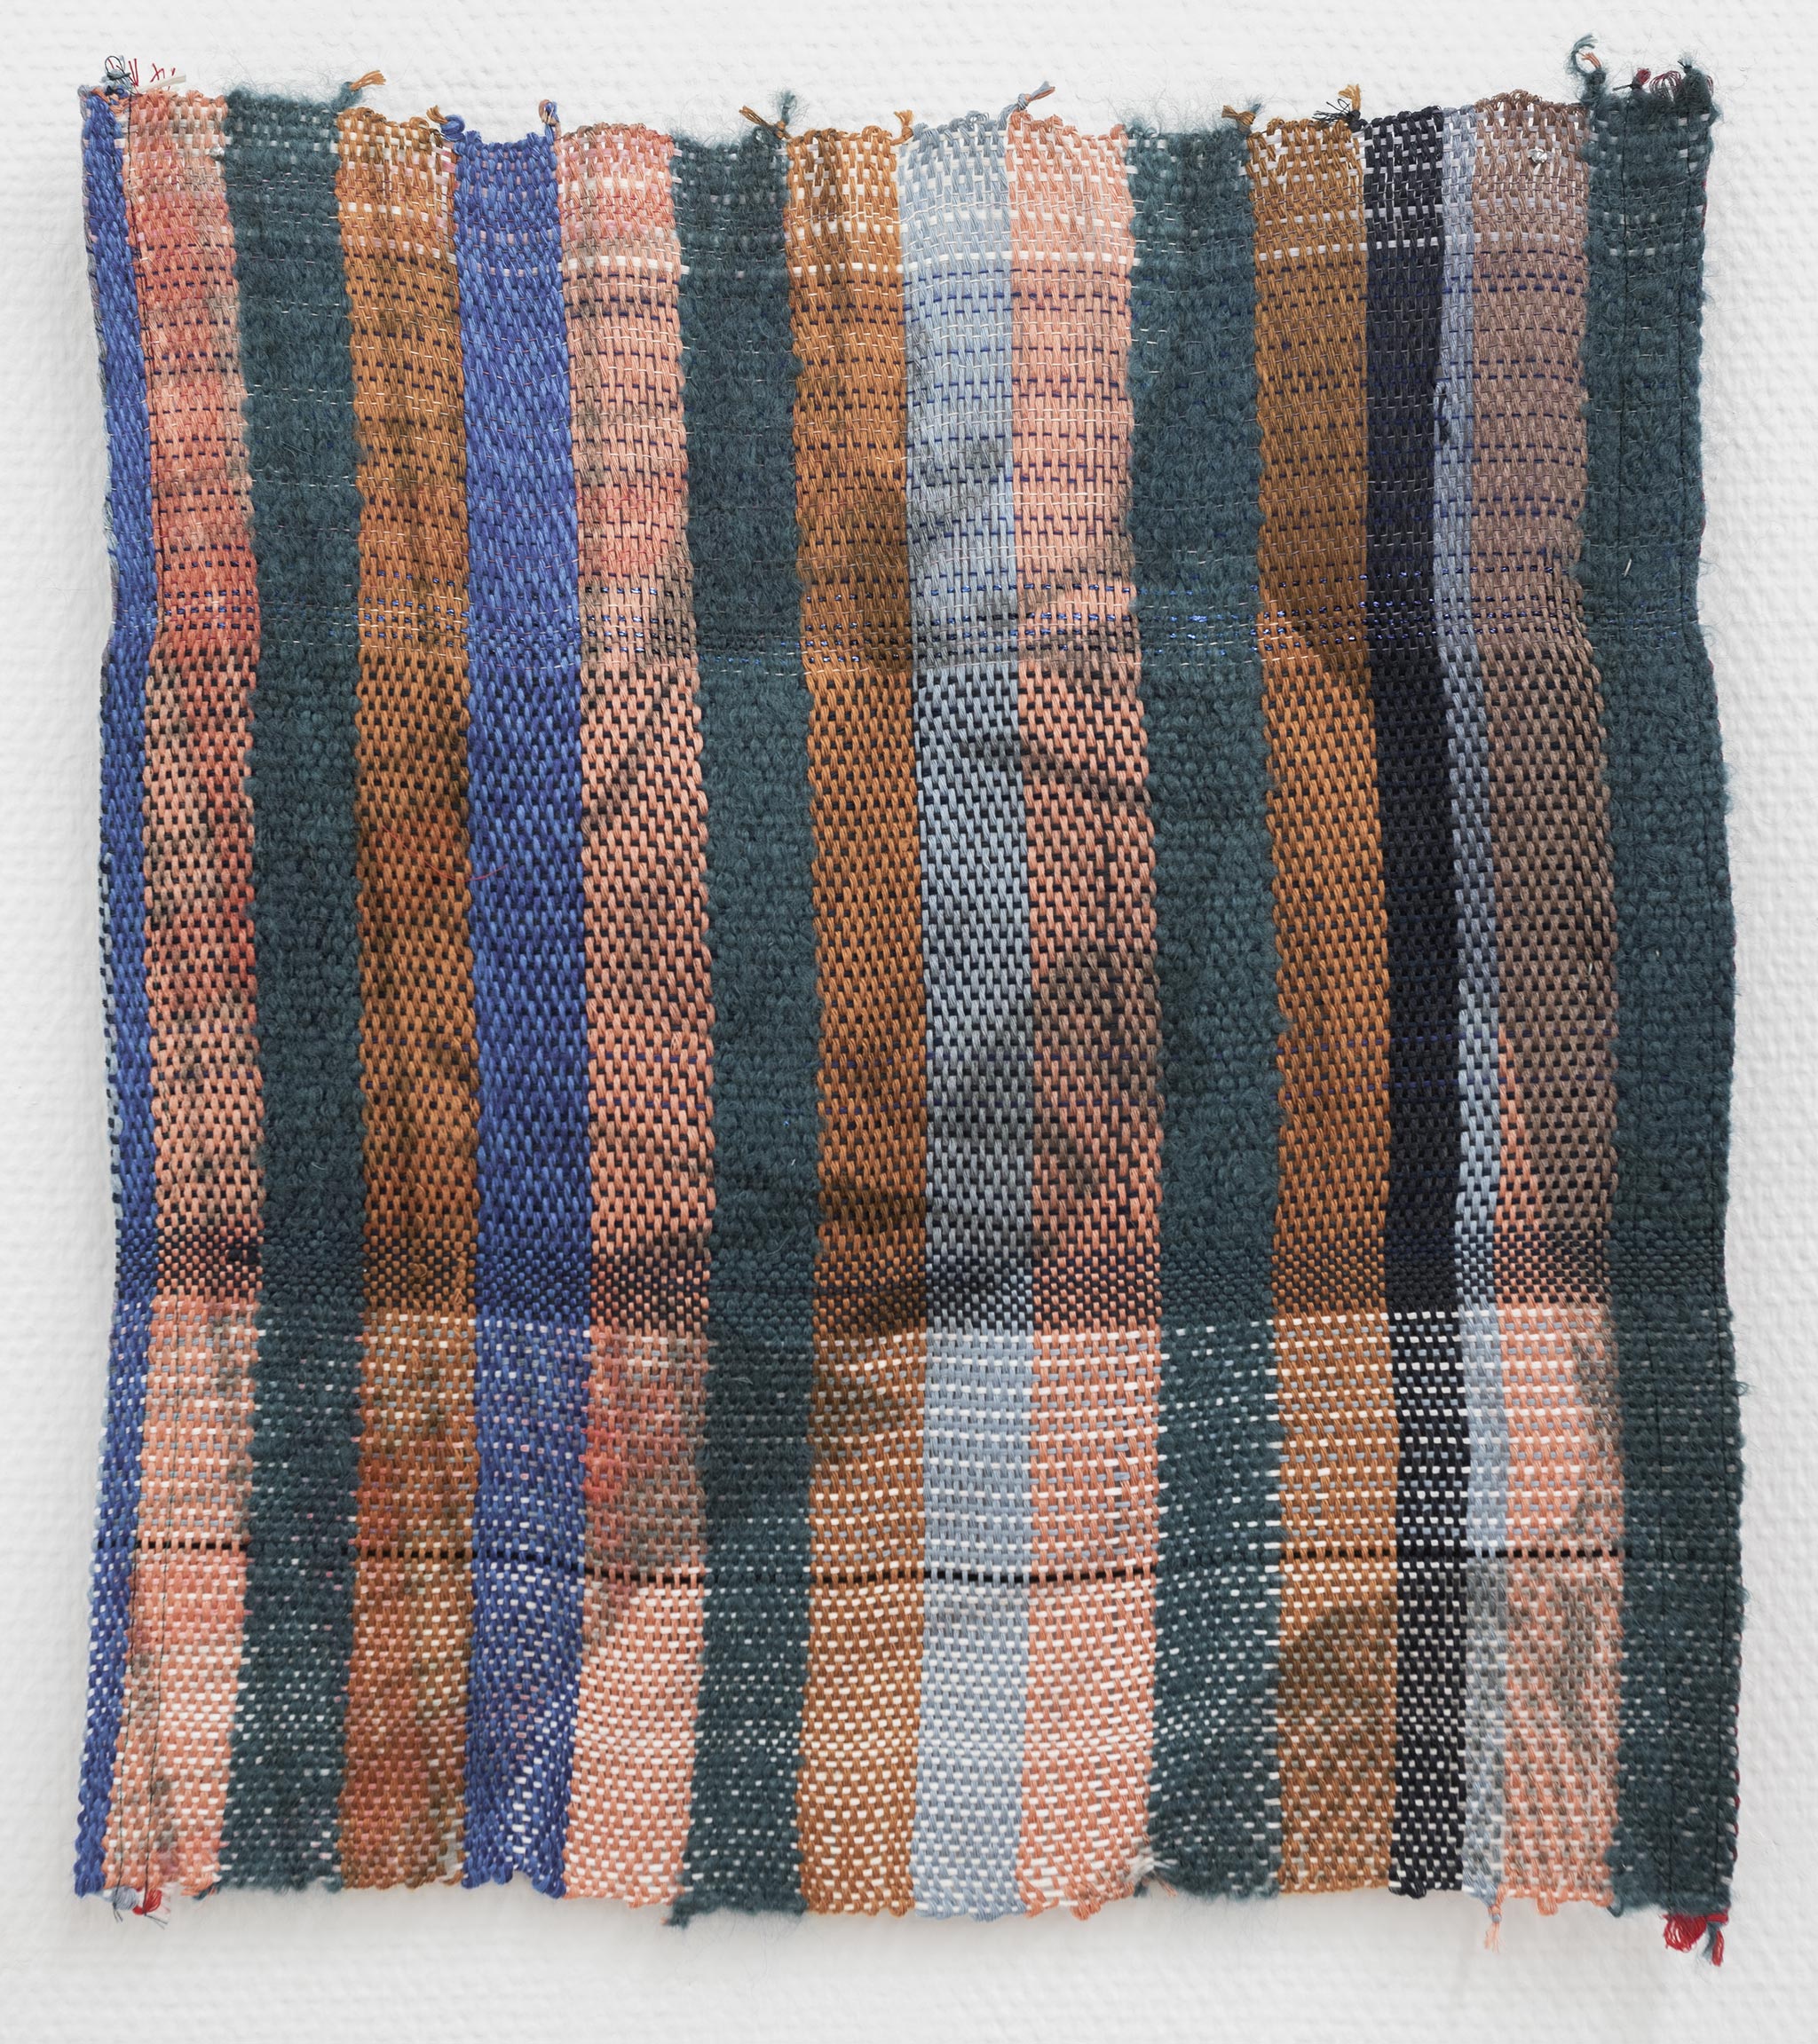 9. Marie Hazard - Douce Foule 2018, hand-woven in paper, linen, bamboo, mohair, digital print sublimation, 42 x 45 cm,